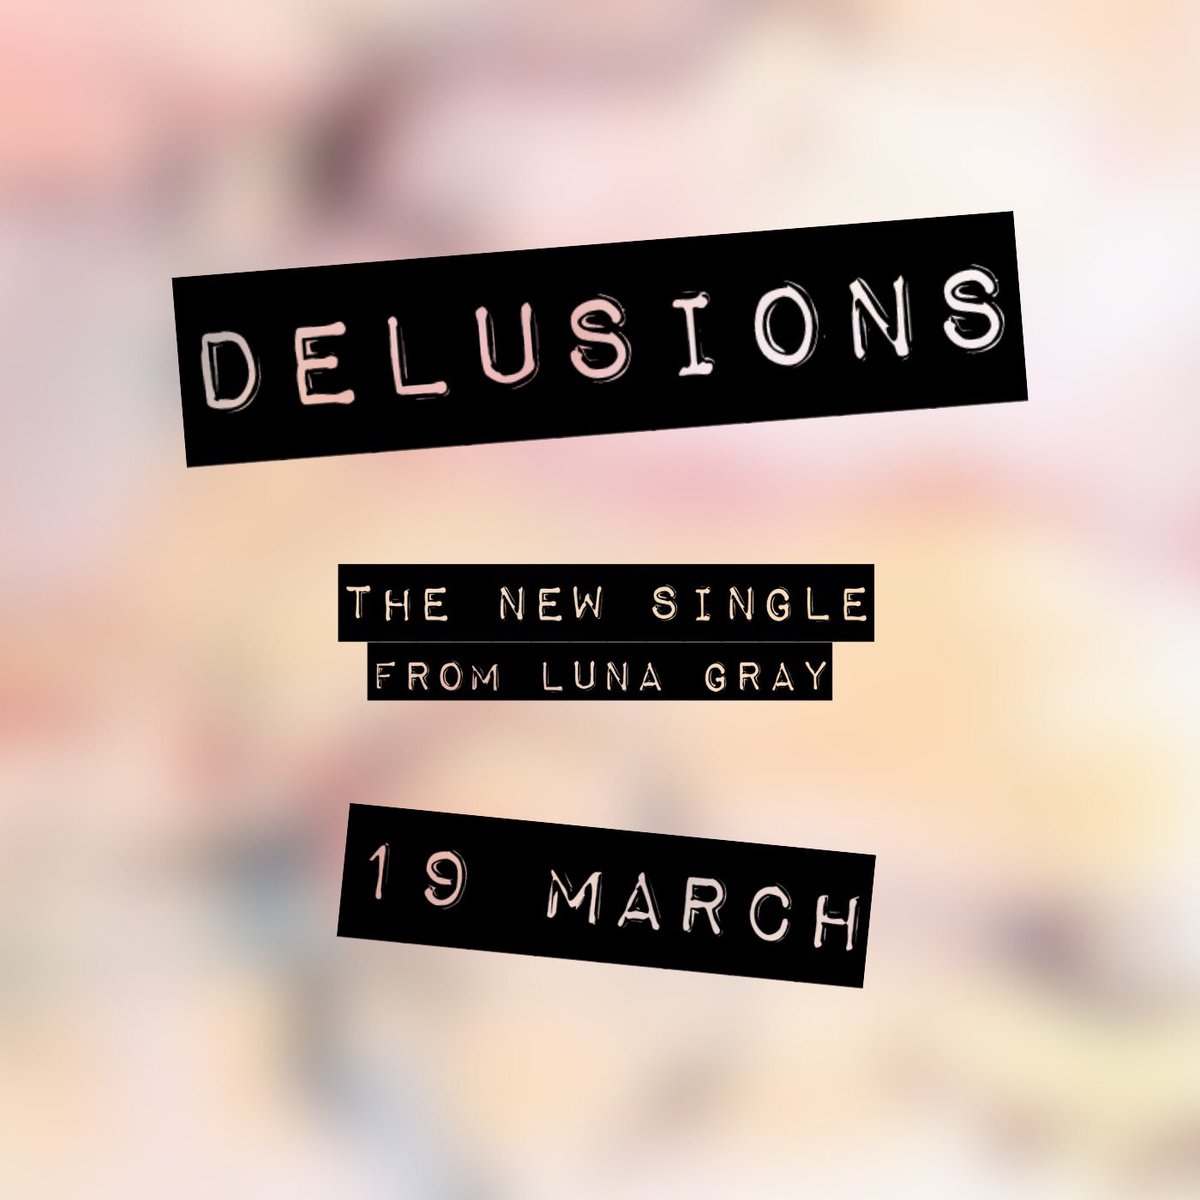 Delusions.

The new single from Luna Gray.

Out 19 March on all streaming platforms & Bandcamp.

Pre-save the song in the bio.

🌙

#LunaGray #LiveMusic #Exeter #SouthWest #BBCIntroducing #DevonMusic #Single #NewMusic